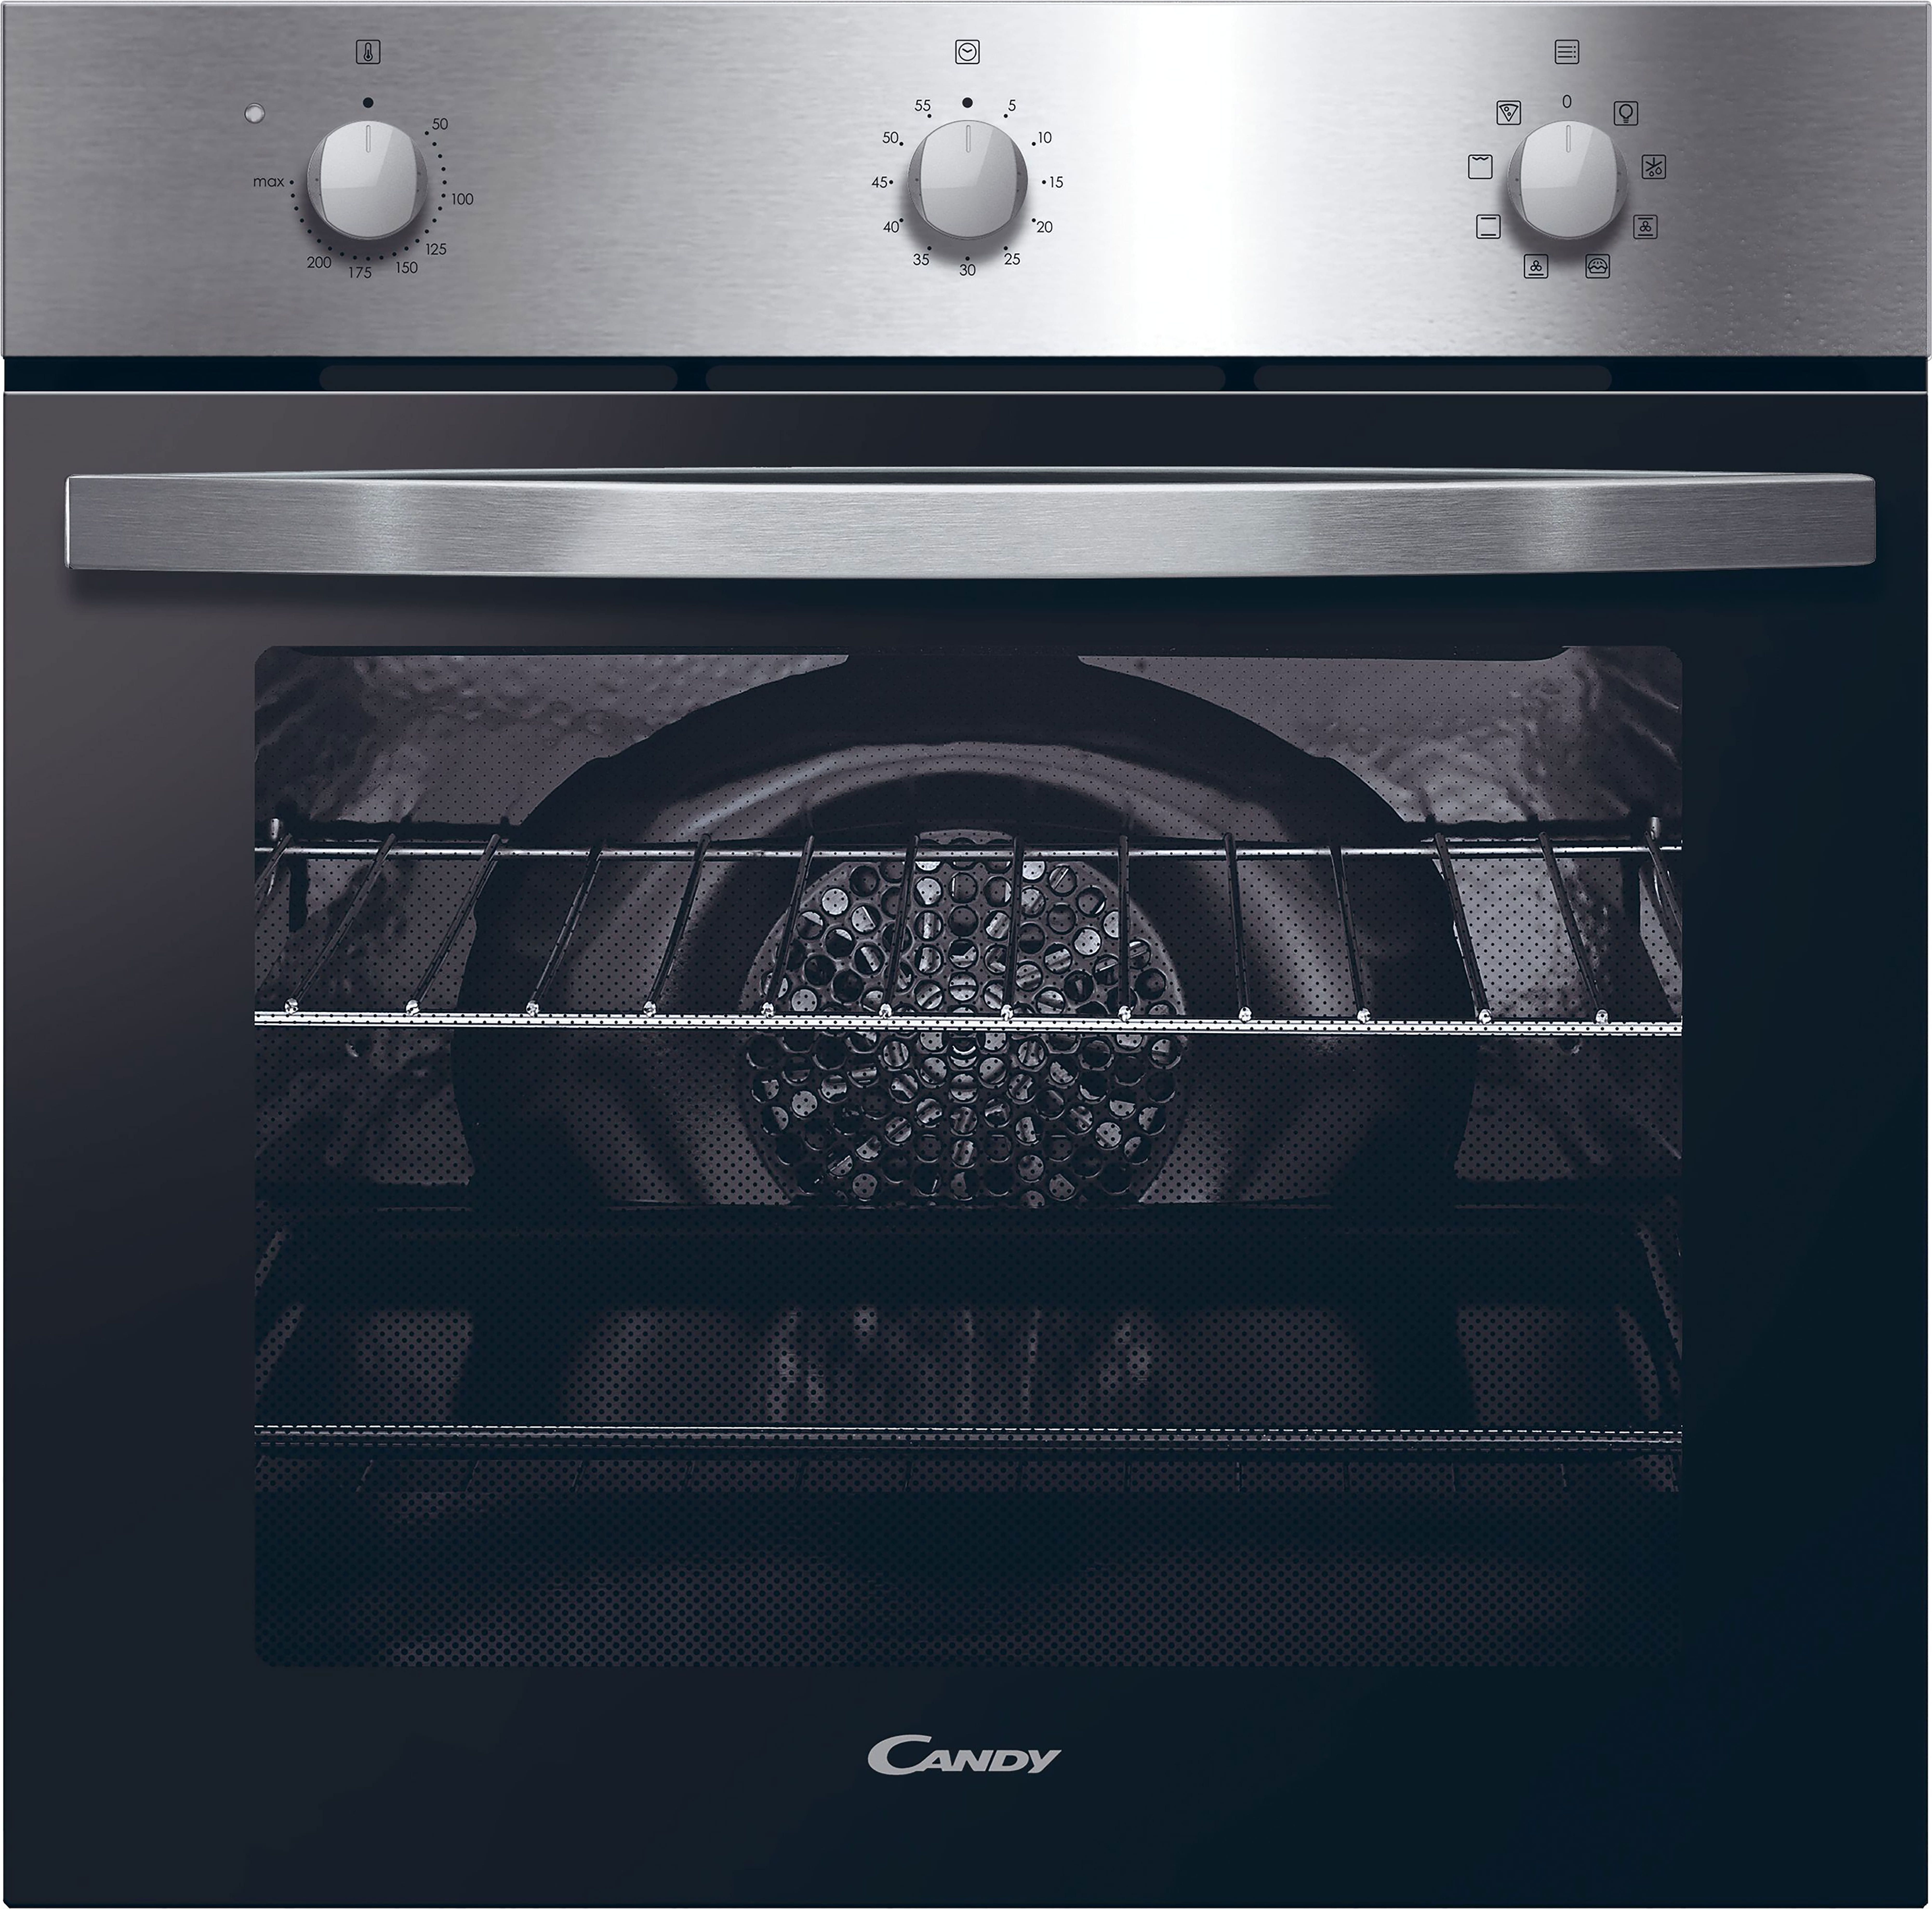 Candy Idea FCI602X/2 Built In Electric Single Oven - Stainless Steel - A+ Rated, Stainless Steel